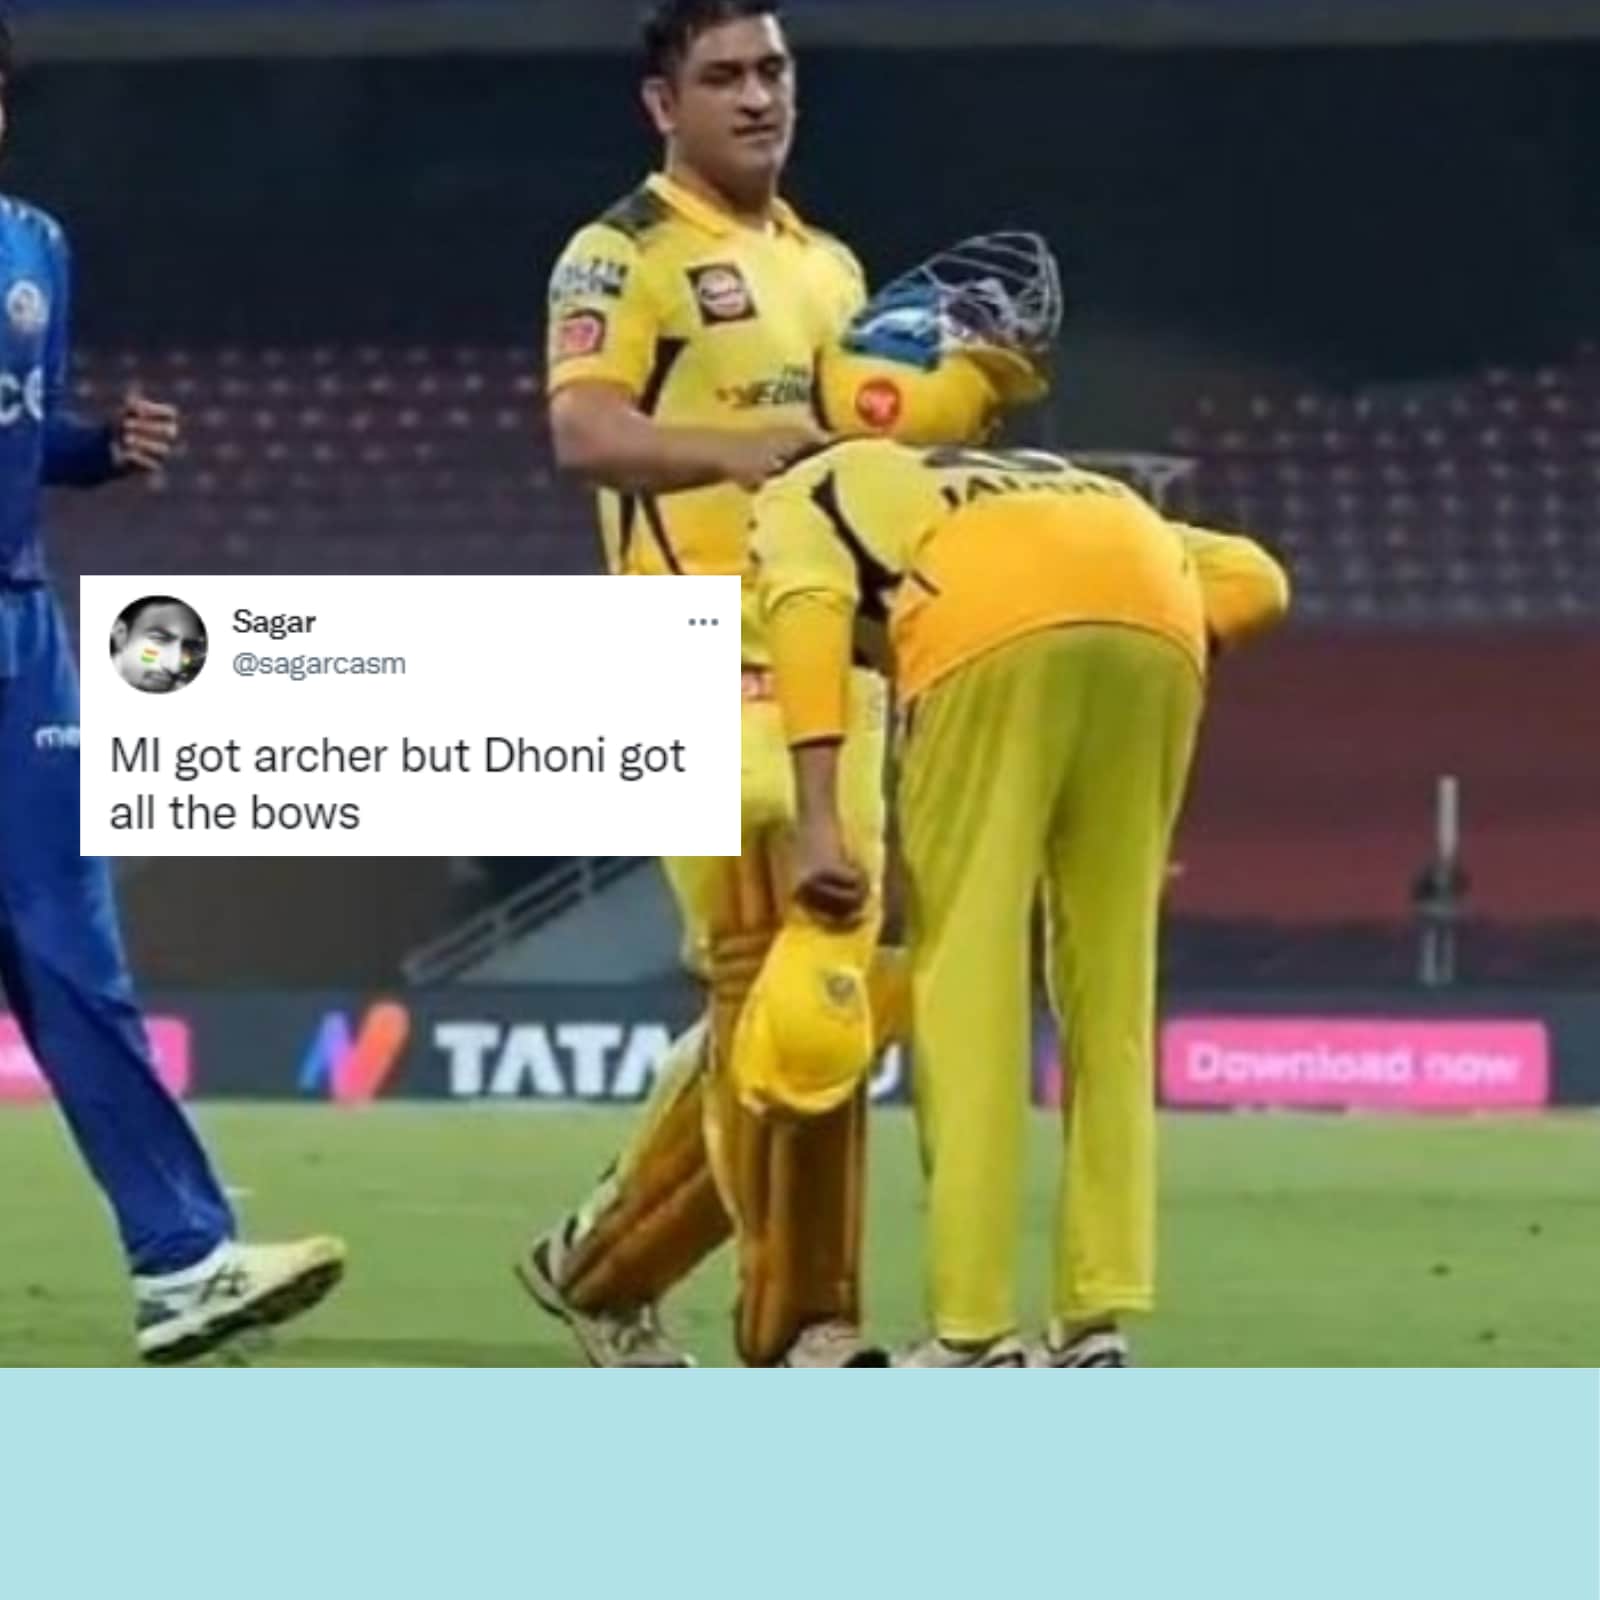 Bow to King': Ravindra Jadeja's Gesture to Dhoni After Classic Run Chase is  All of Us